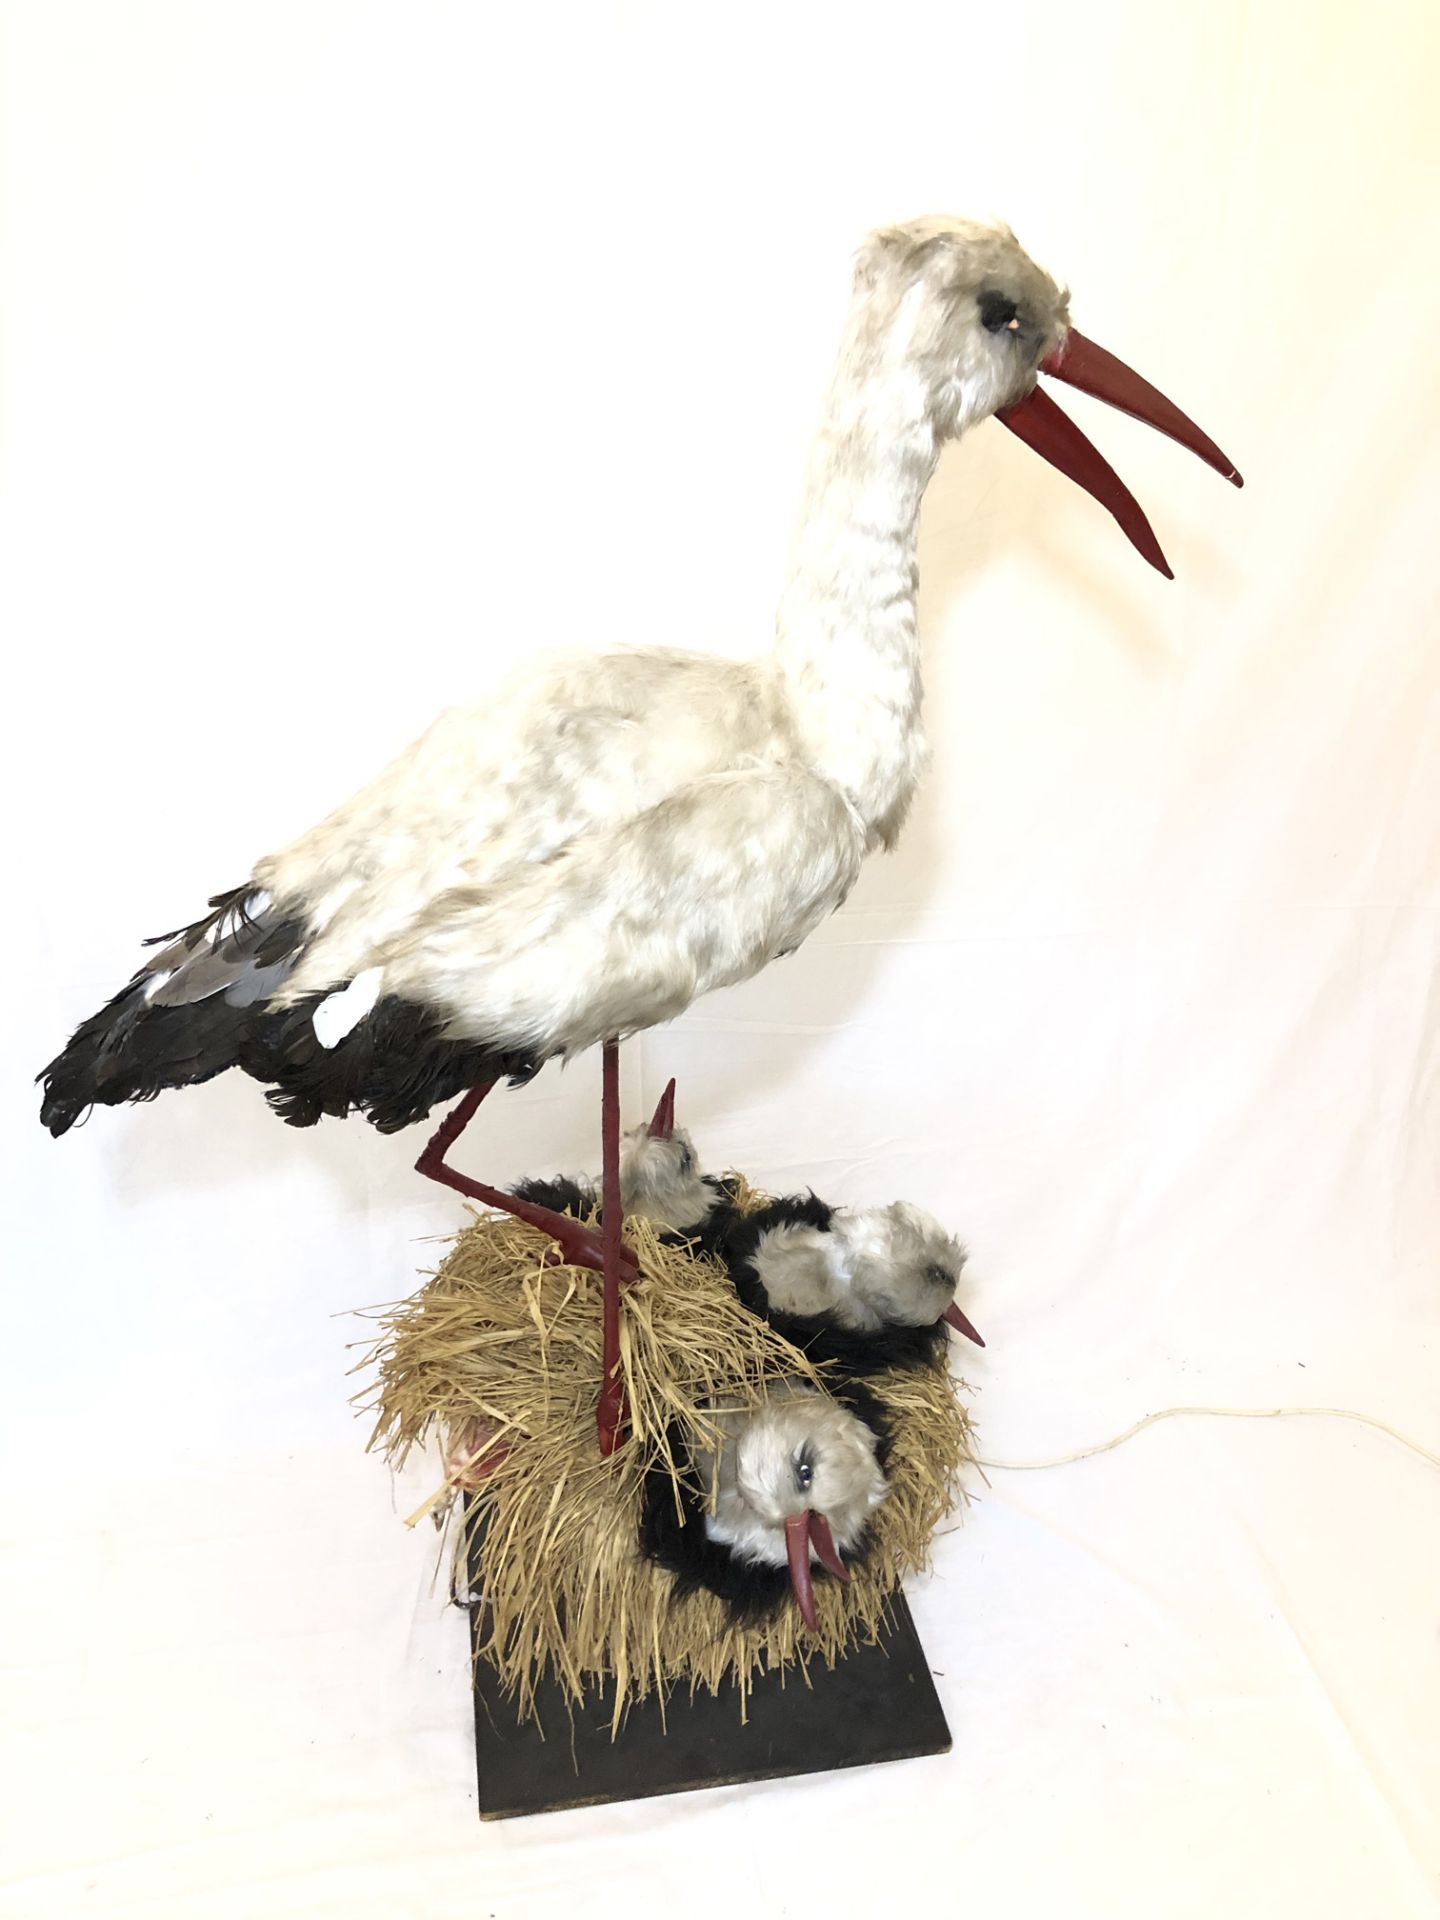 Moving Store Display Doll Stork with 3 Babies - Image 2 of 4